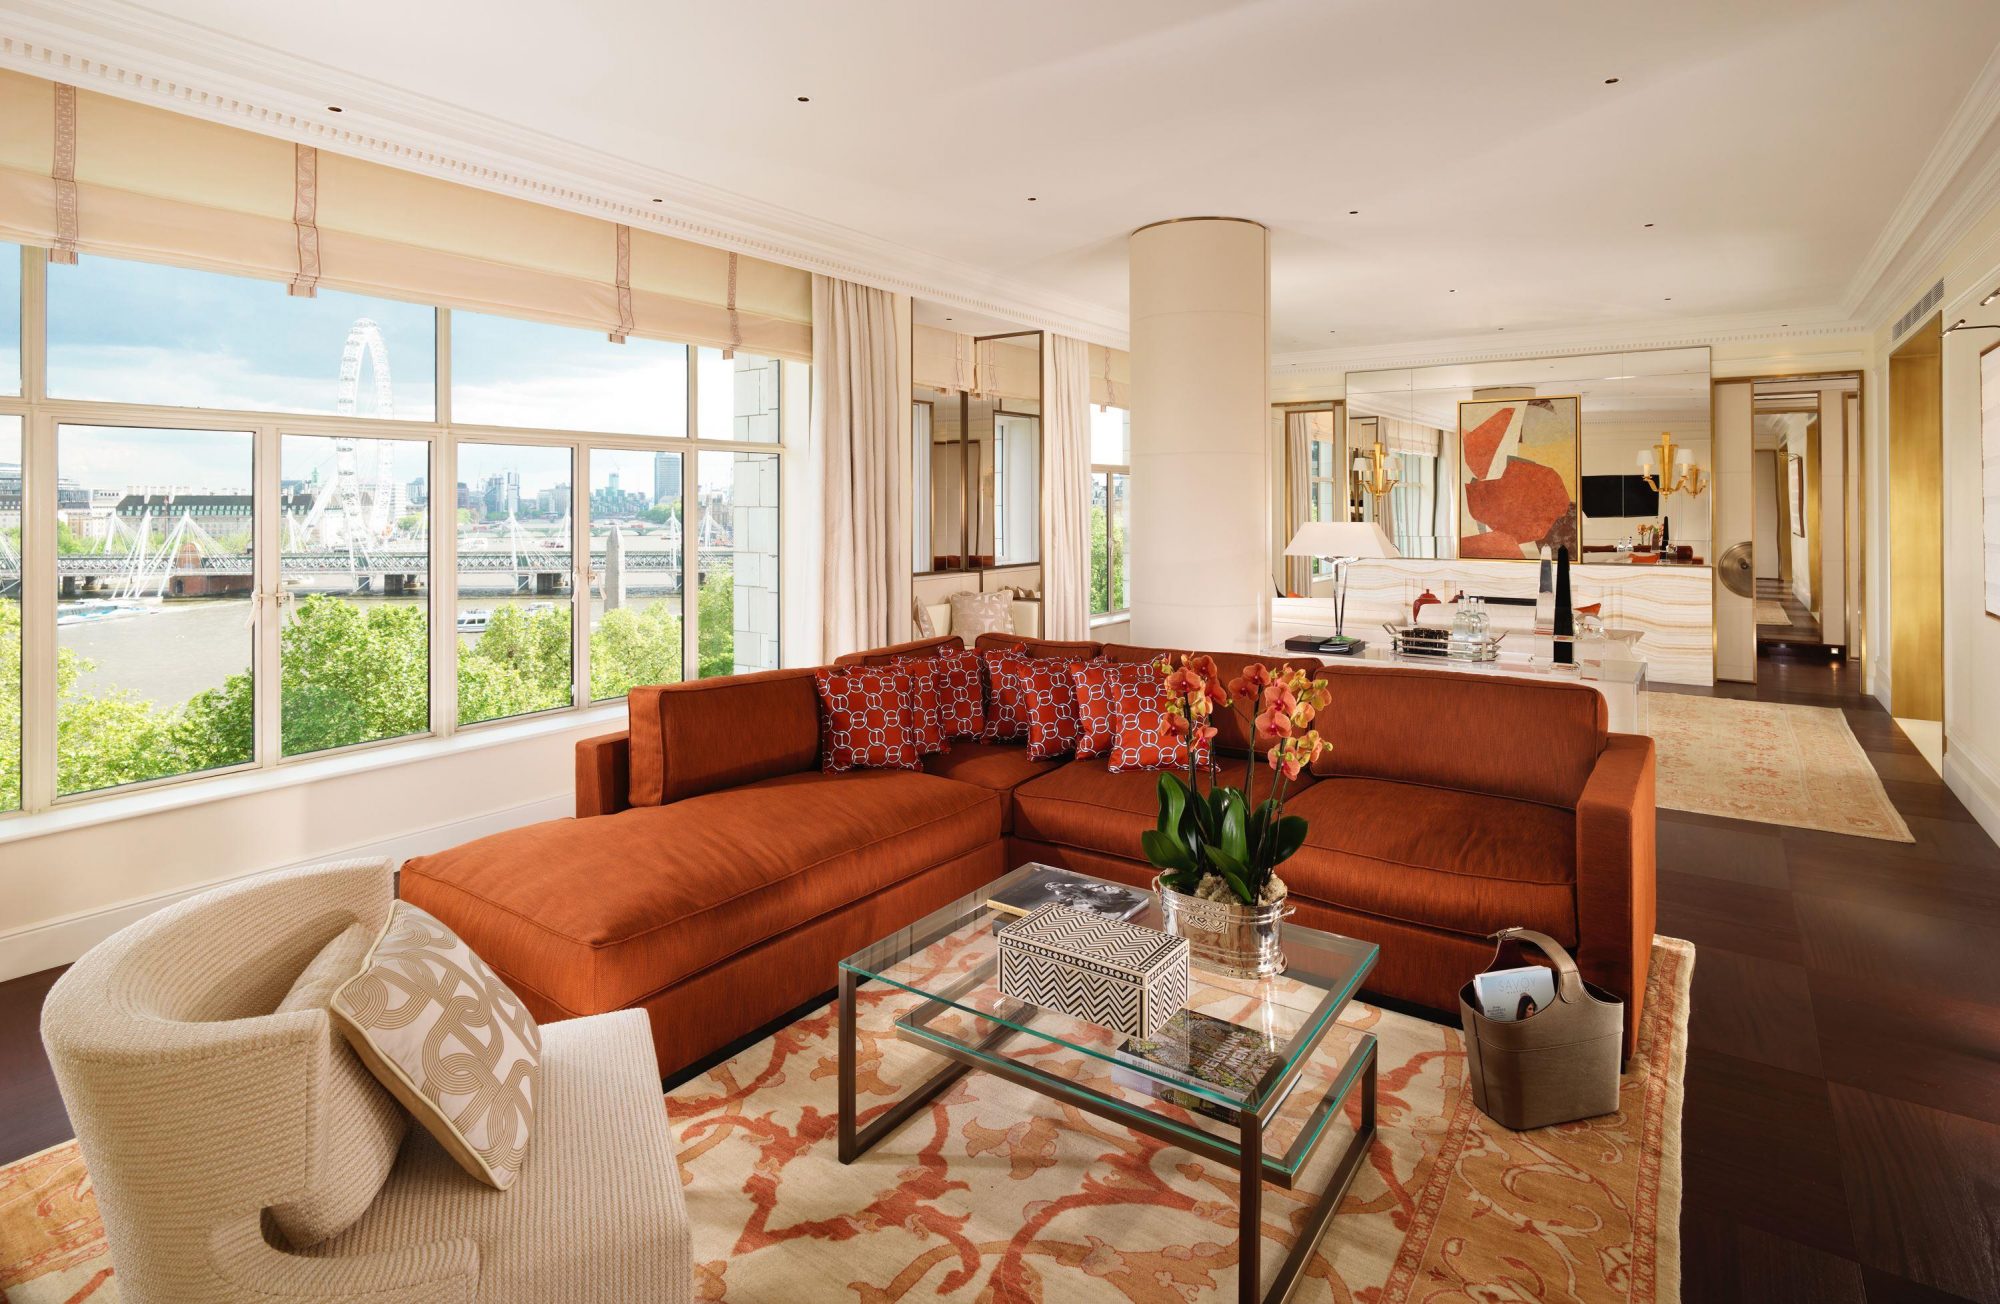 The Savoy – The Savoy Suite Living Room